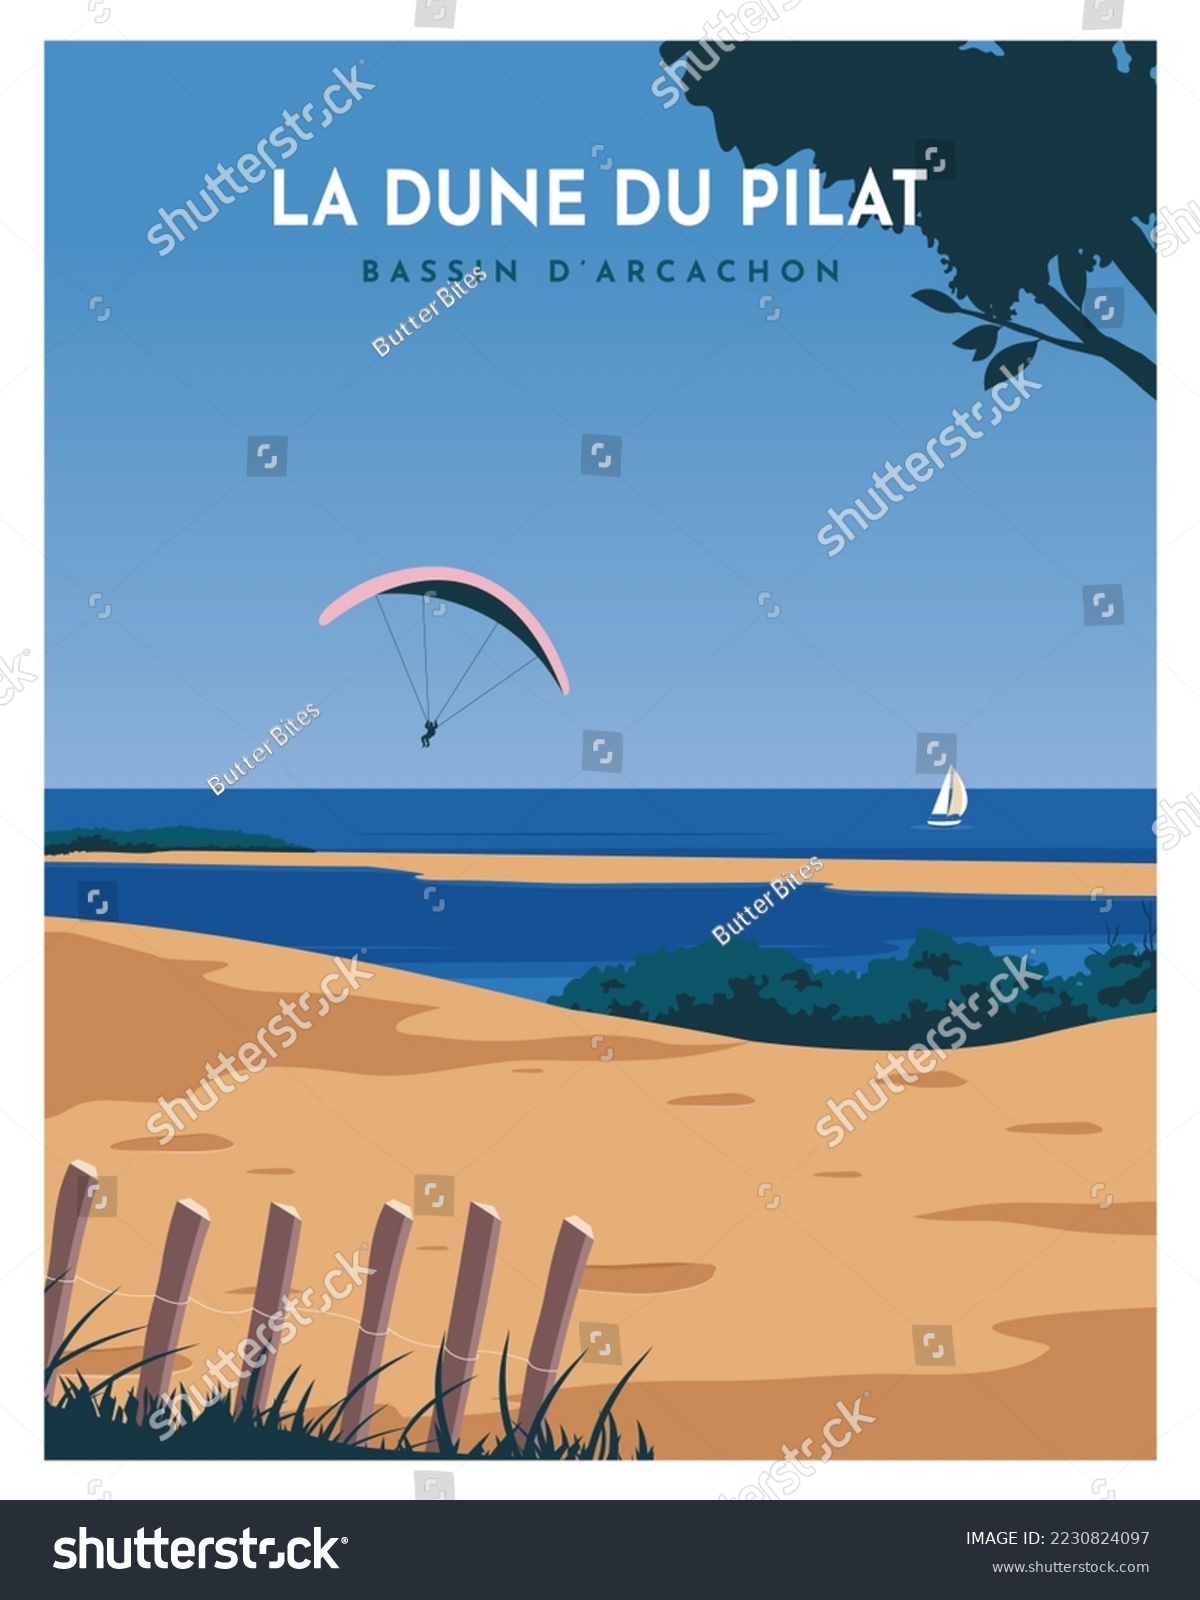 SVG of travel poster landscape sand dune with a blue sky with clouds, and paragliding on Dune du Pilat, Arcachon, France.
vector illustration with flat style for poster, postcard, card, bakground, art print. svg